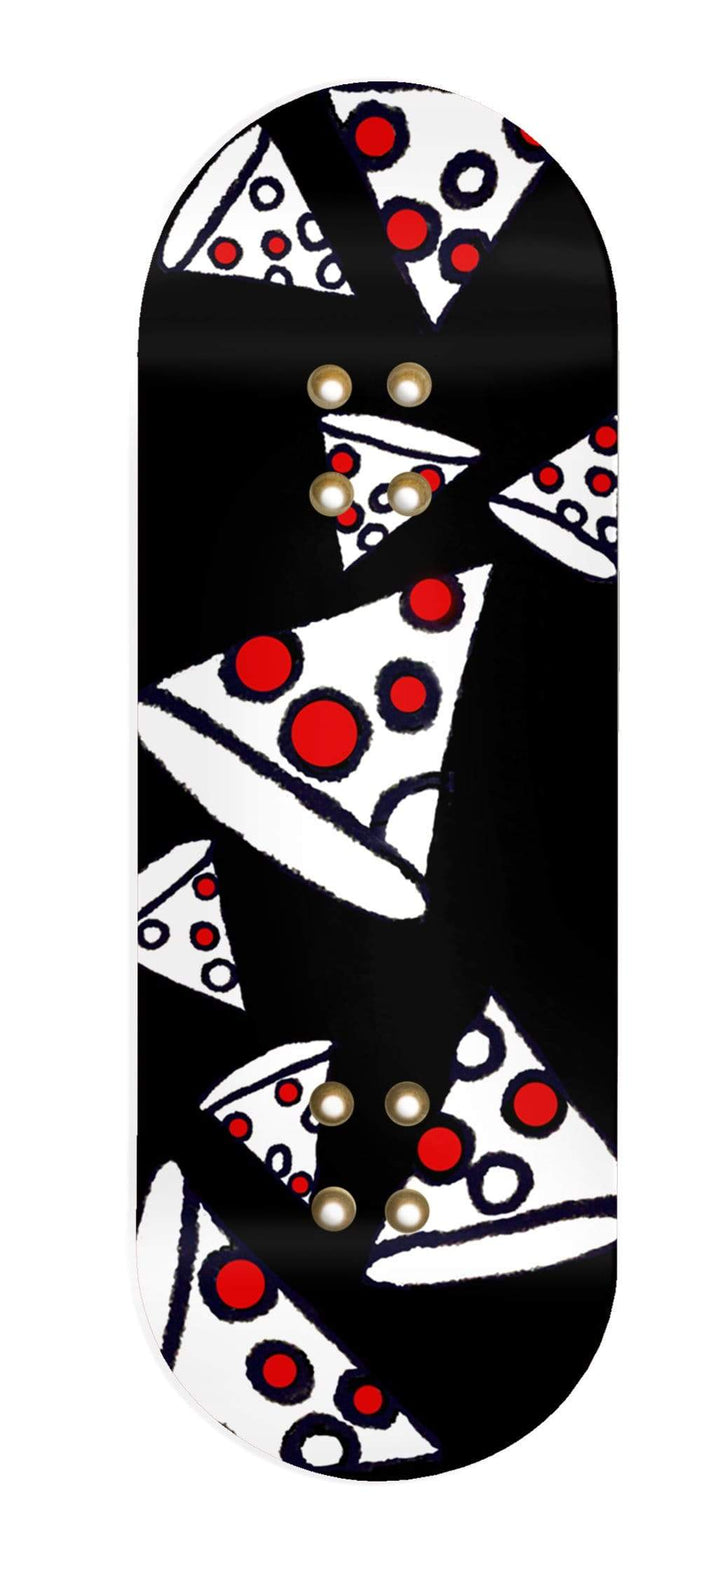 Teak Tuning "Pizza Frenzy" WellVentions Collaboration Deck Graphic Wrap - Designed by Isabela (age 14) - 35mm x 110mm